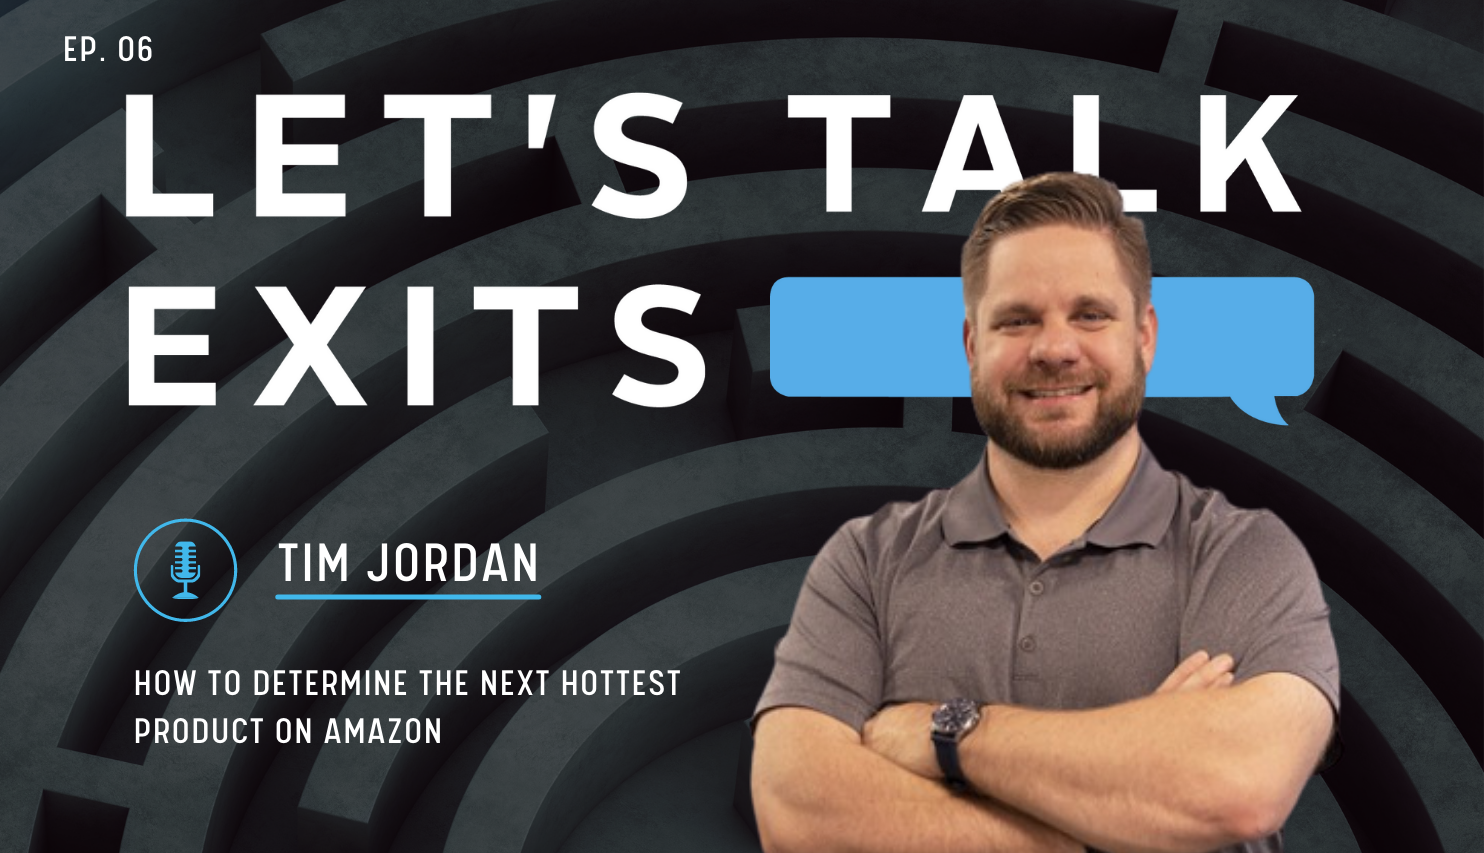 How to Determine the Next Hottest Product on Amazon with Tim Jordan